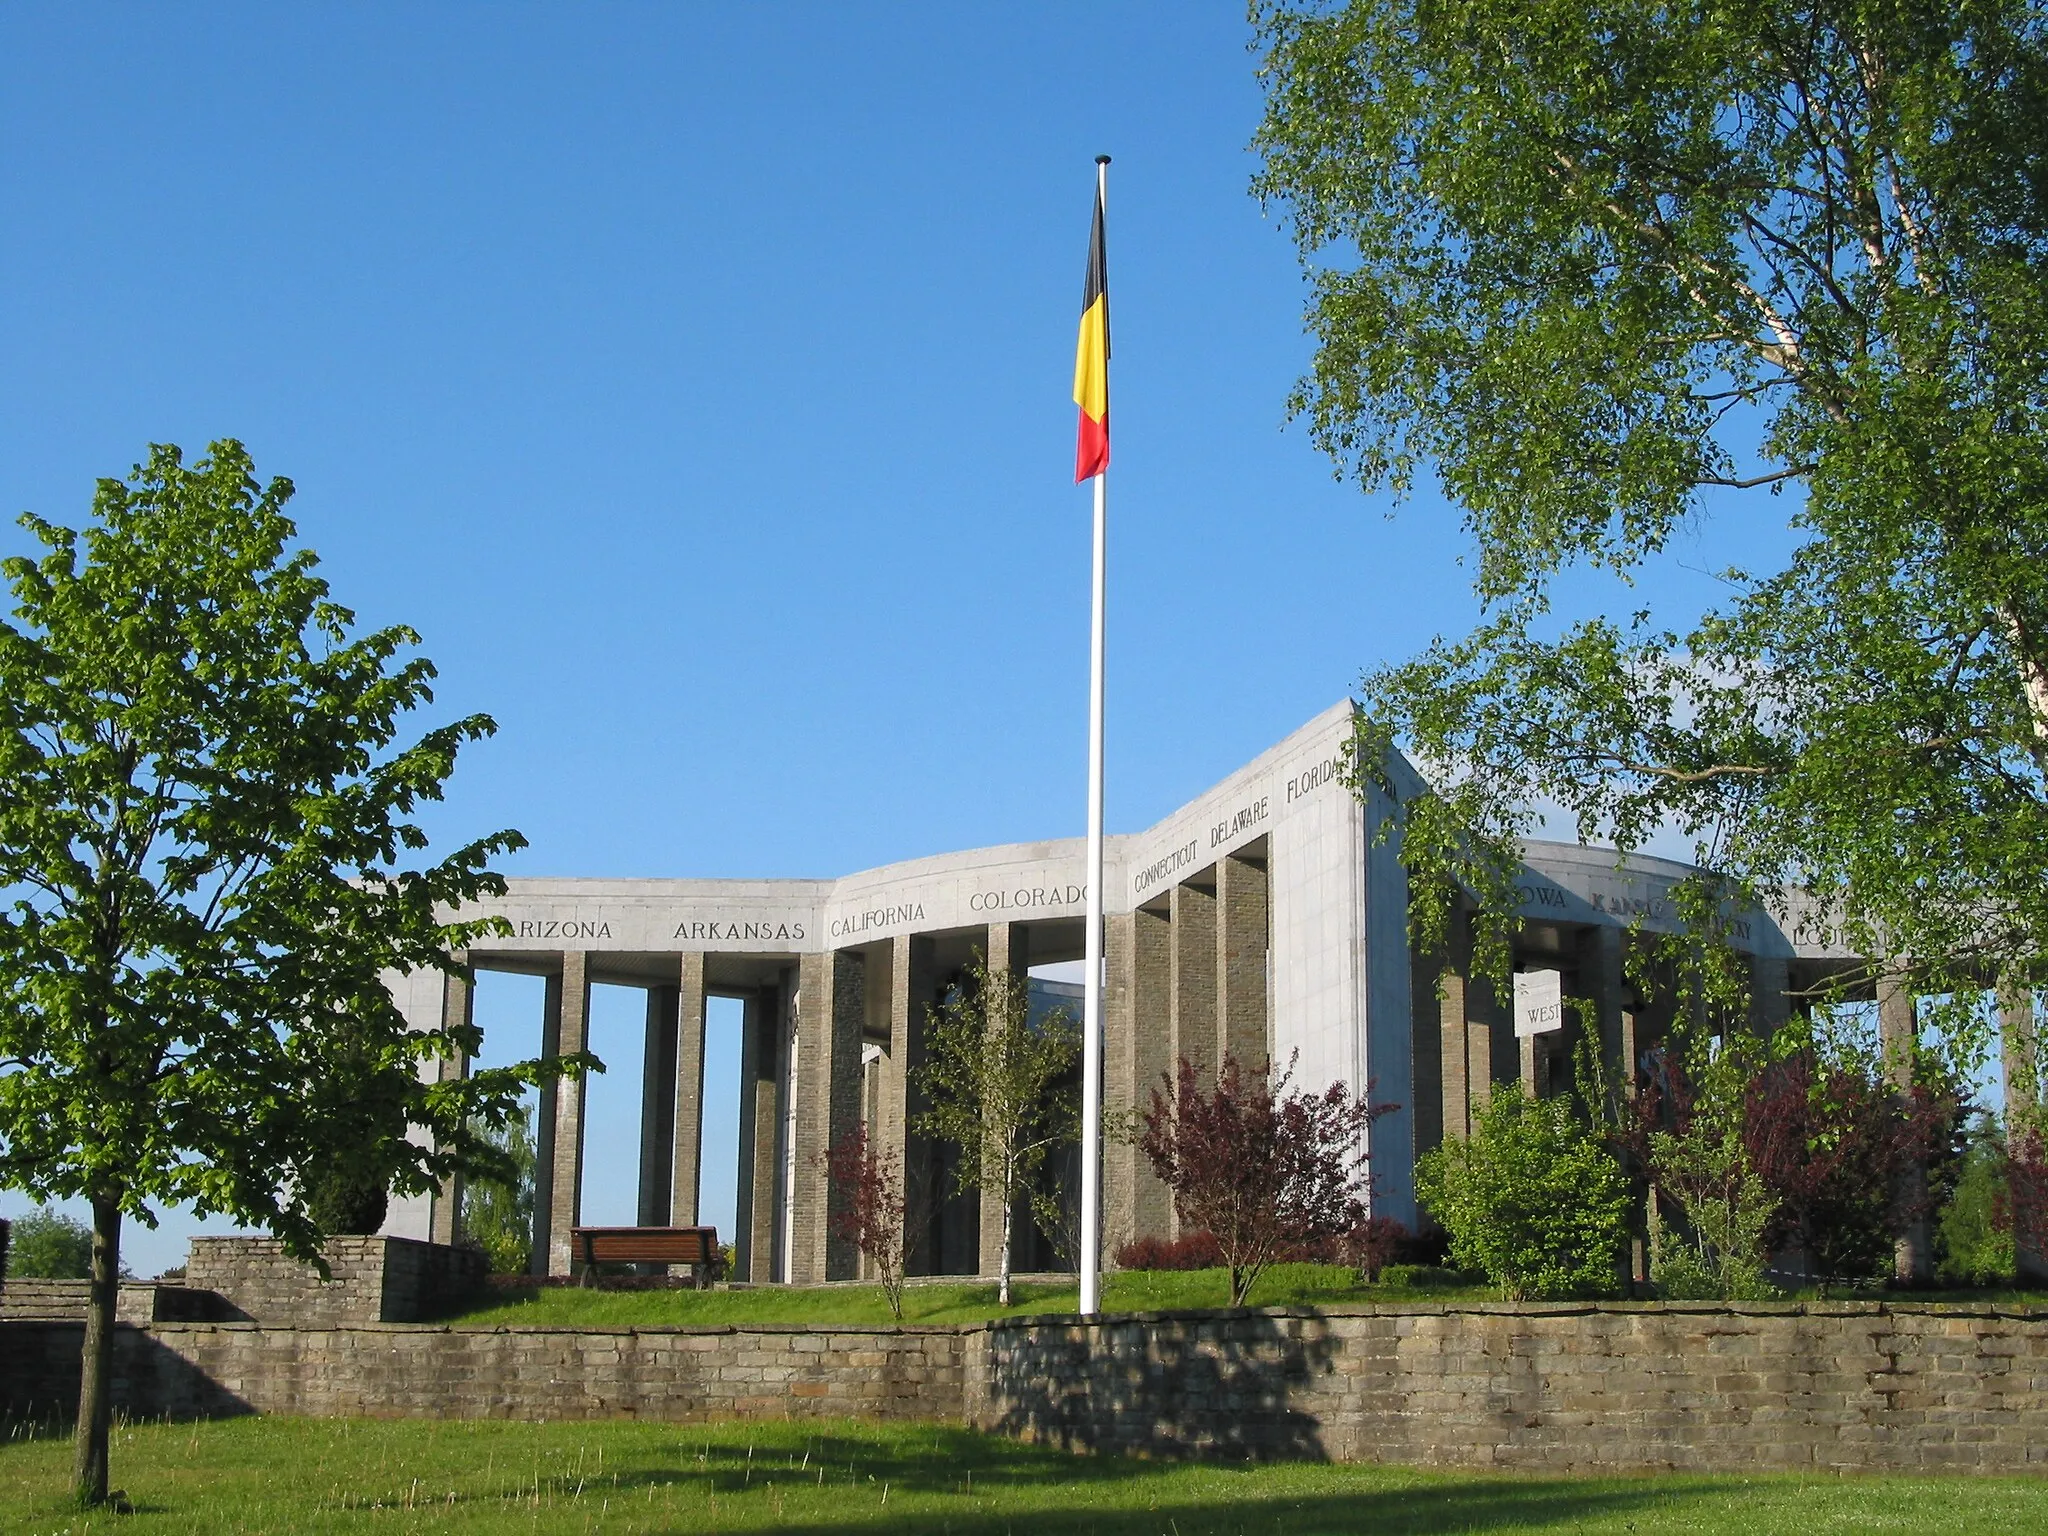 Image of Prov. Luxembourg (BE)